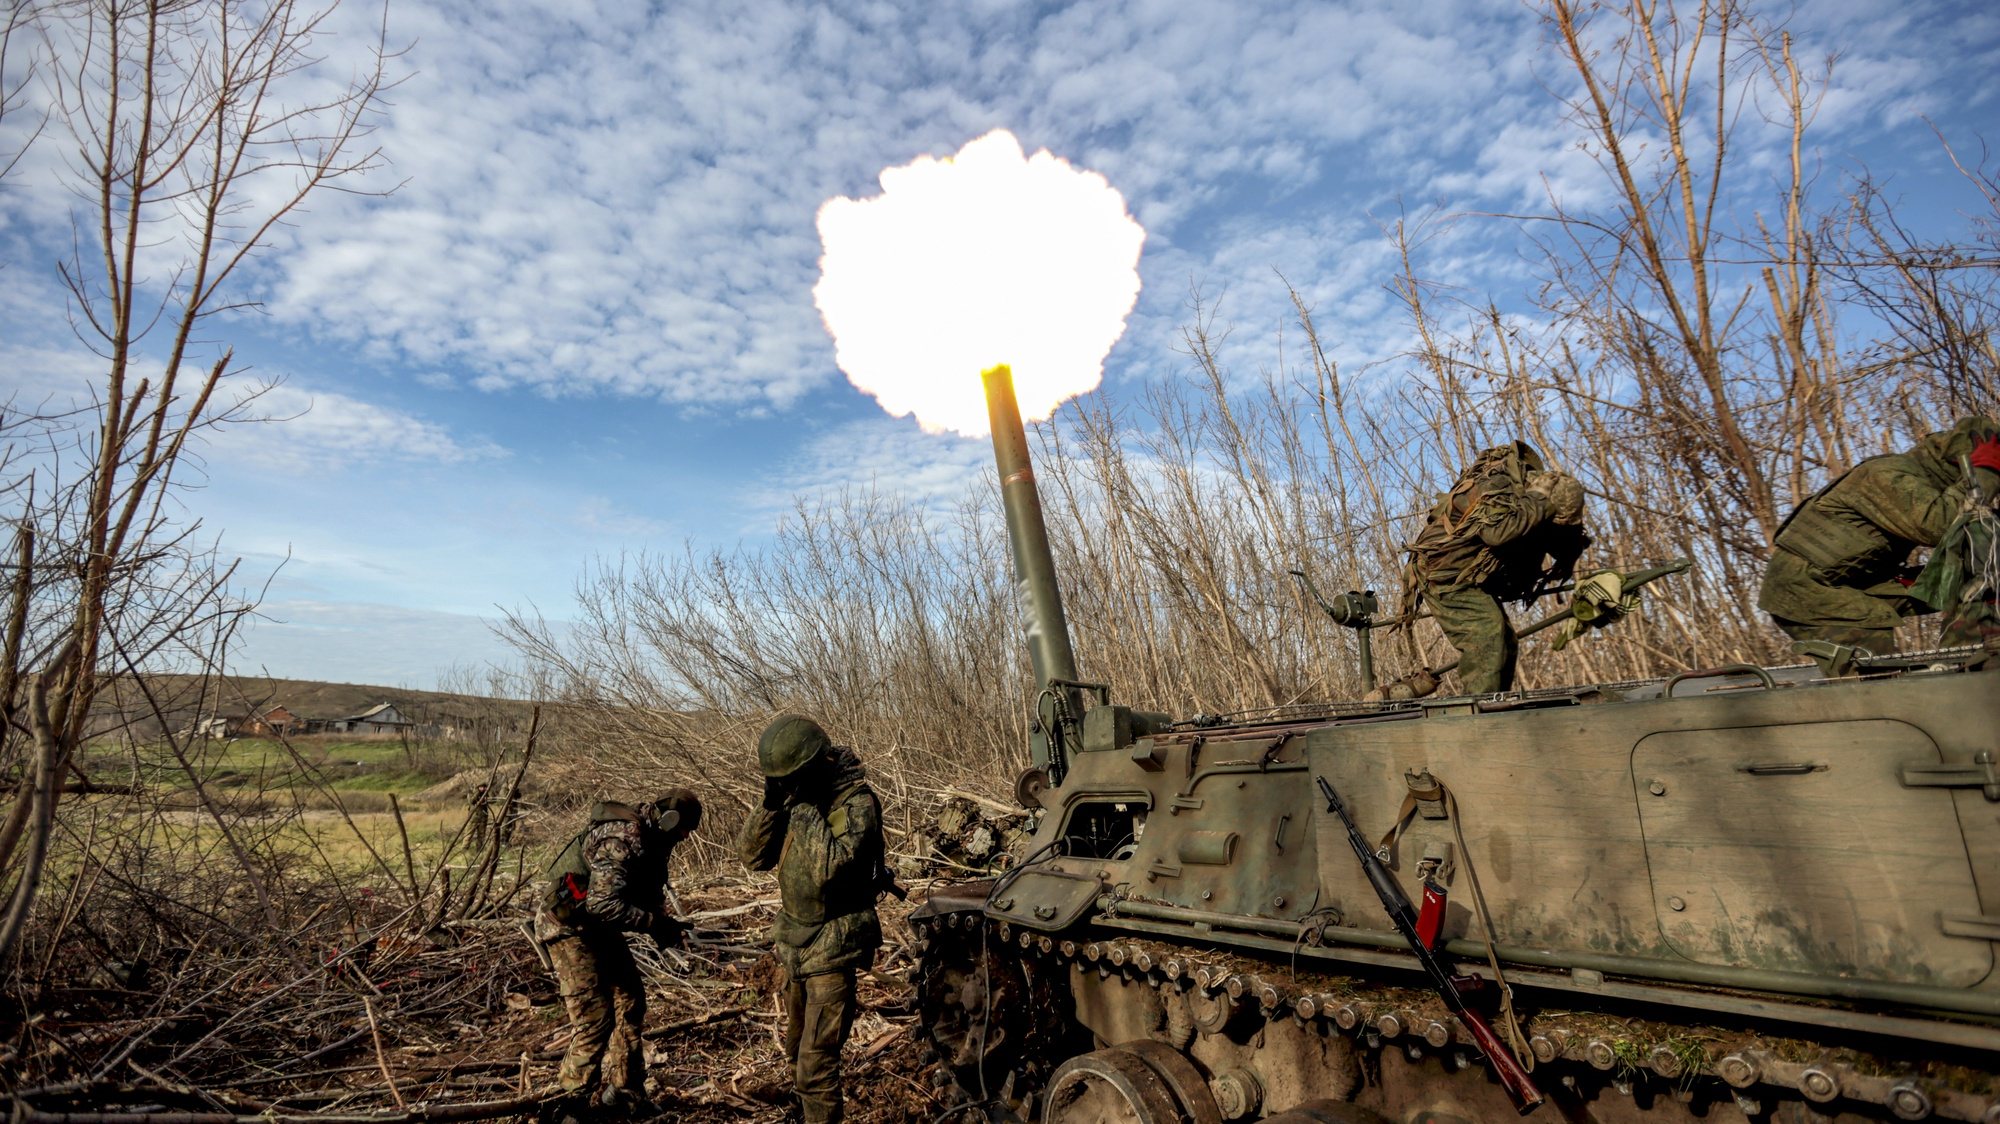 epa10481388 (FILE) - Forces of the self-proclaimed Donetsk People&#039;s Republic fire a self-propelled mortar 2S4 &#039;Tulip&#039; not far from Bakhmut, Donetsk region, Ukraine, 01 December 2022 (reissued 21 February 2023). Russian troops on 24 February 2022, entered Ukrainian territory, starting a conflict that has provoked destruction and a humanitarian crisis. One year on, fighting continues in many parts of the country.  EPA/ALESSANDRO GUERRA  ATTENTION: This Image is part of a PHOTO SET